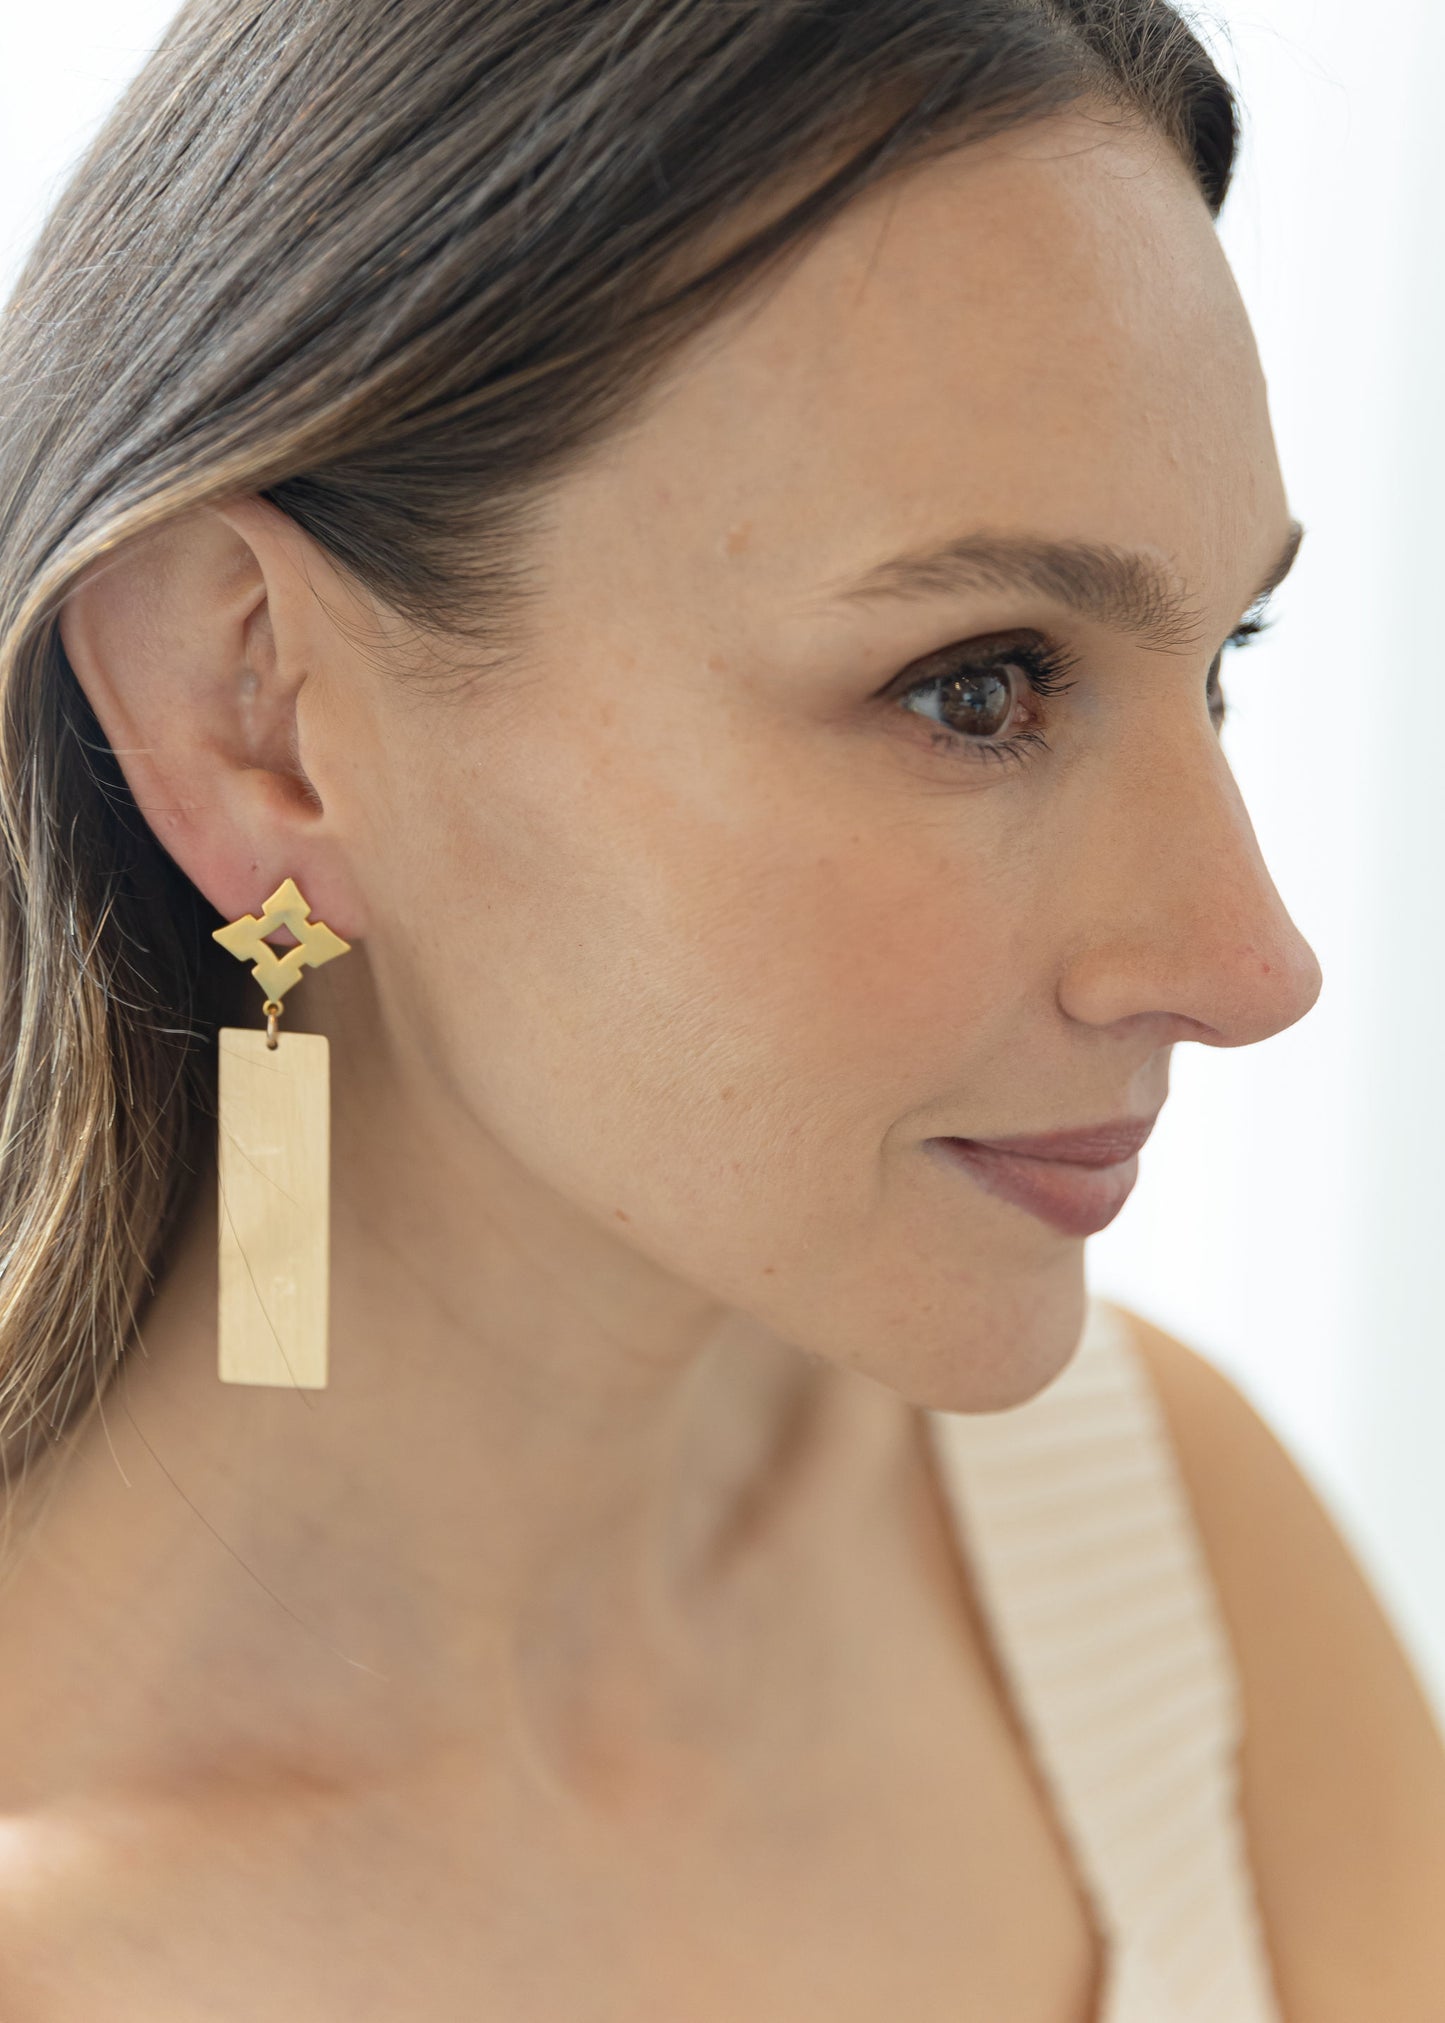 Focus with Mini Oscar Earrings, Manifest Collection, Kristin Hayes Jewelry